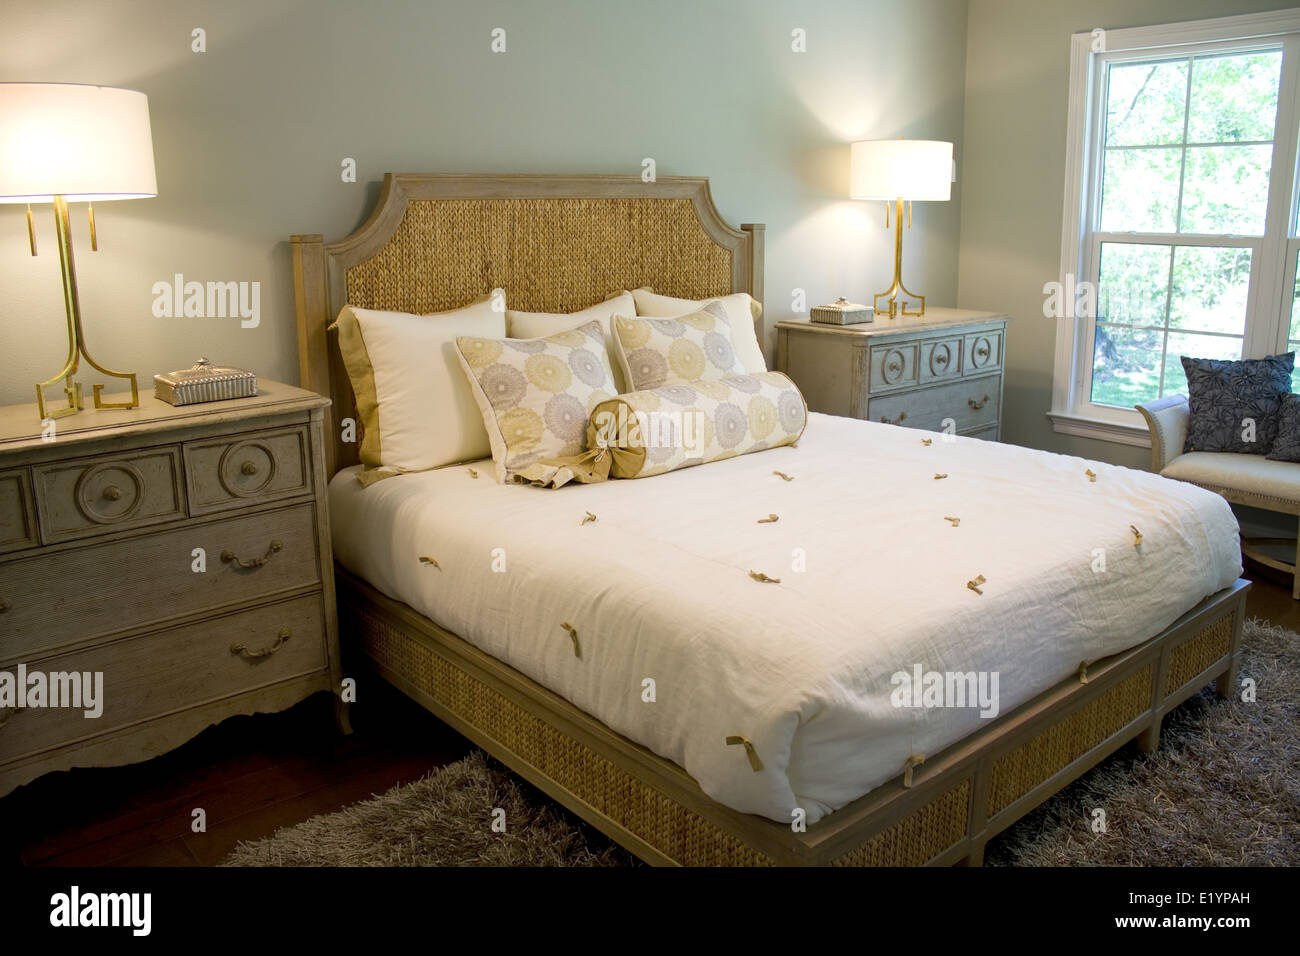 Elegant well lighted bedroom with dresser chest, lamps and headboard. Stock Photo